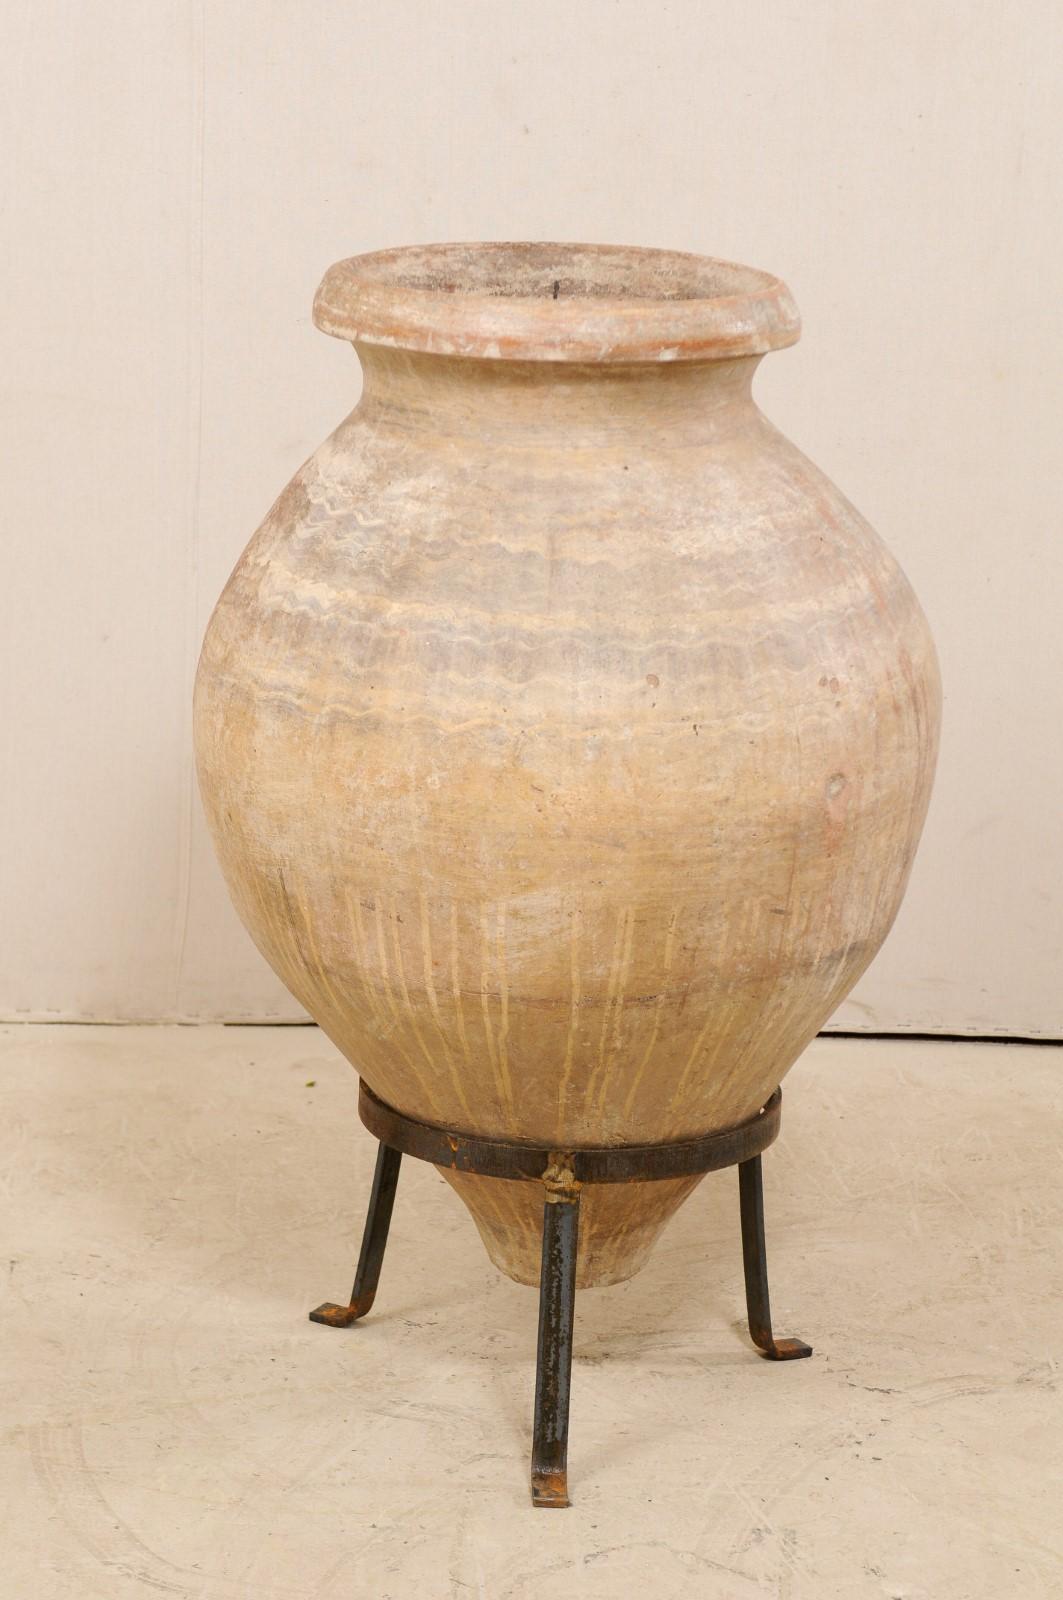 A Spanish large-sized jar from the 19th century on custom stand. This antique vessel from Spain, once used to hold olives, is made of terracotta having a bulbous center, which tapers at the bottom. There is a subtle design pattern and fabulous old